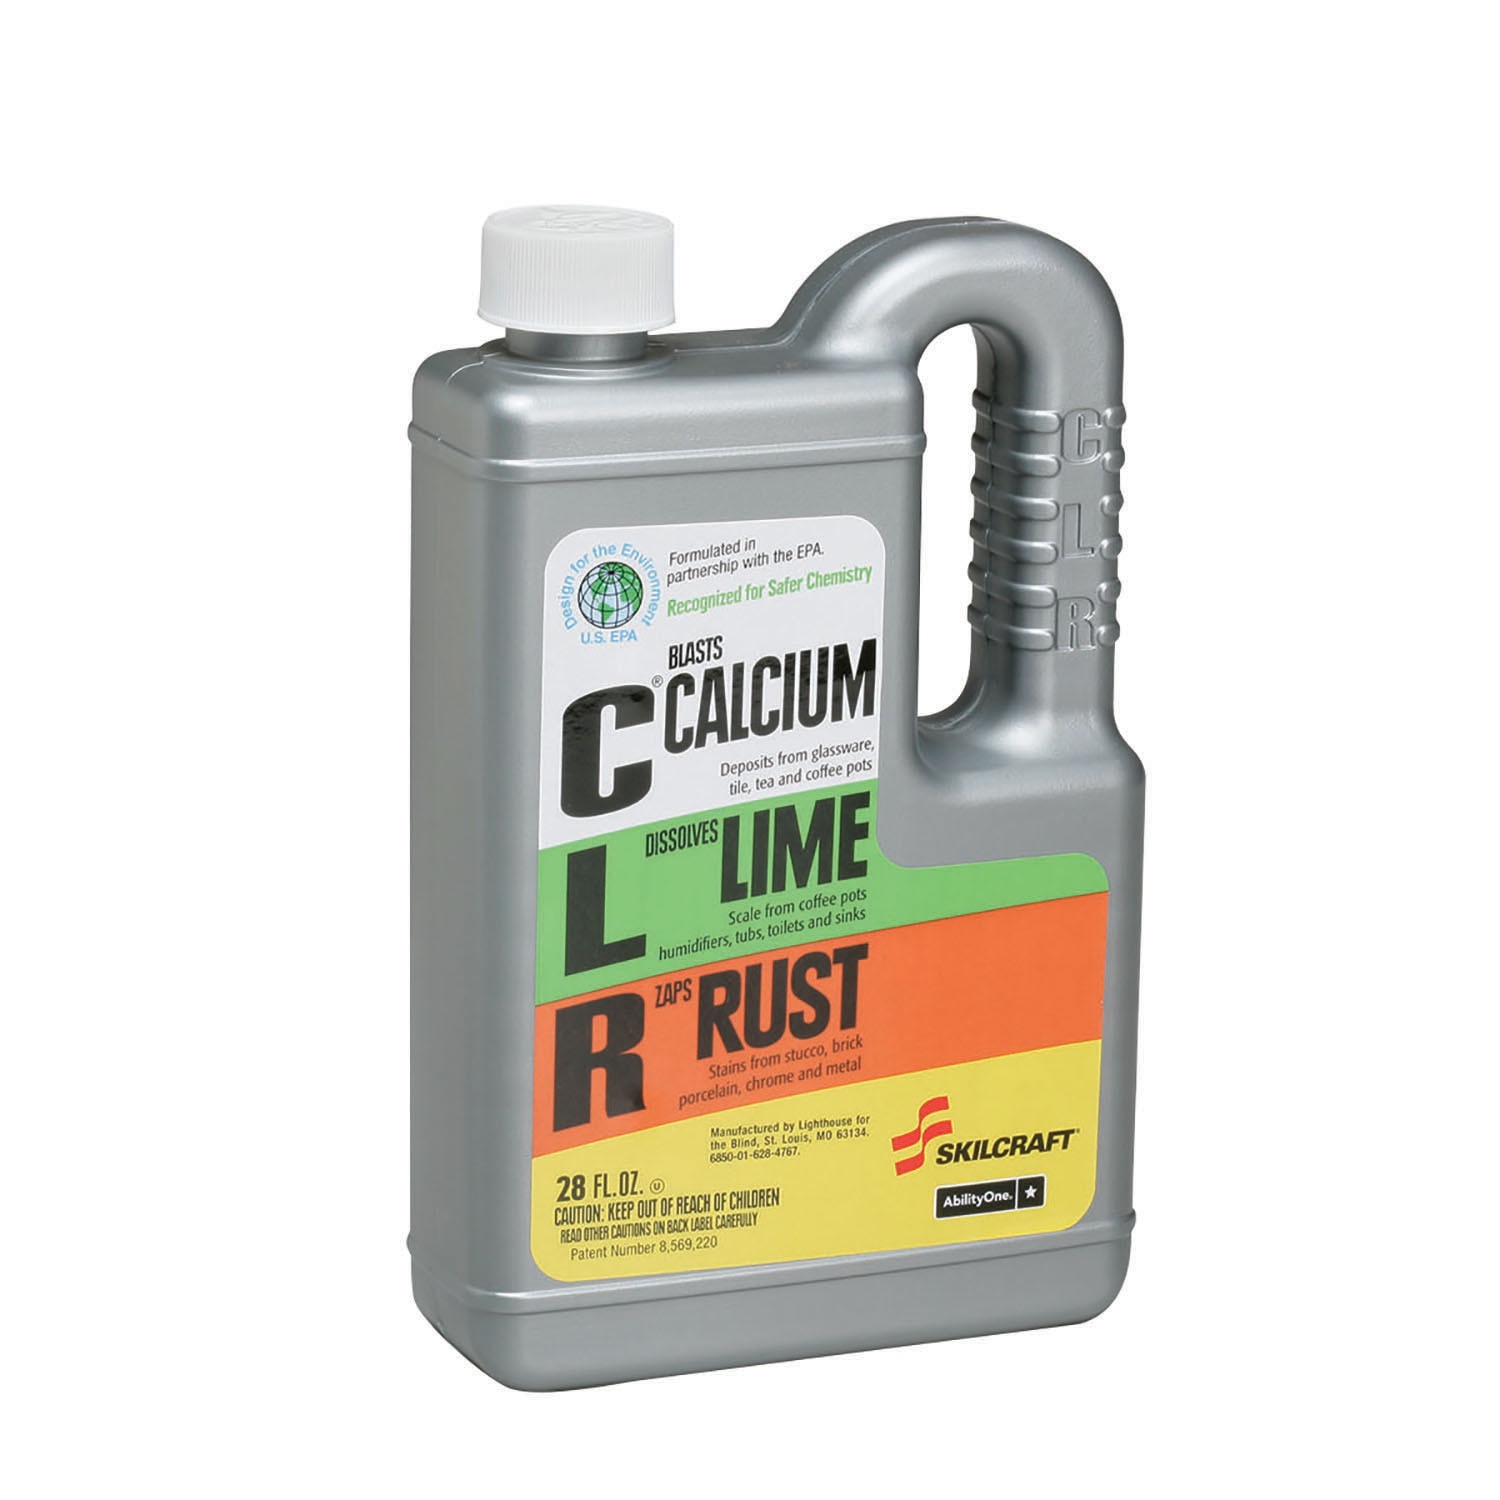 Calcium, Lime, and Rust Remover, 4/1 Gallon Bottles